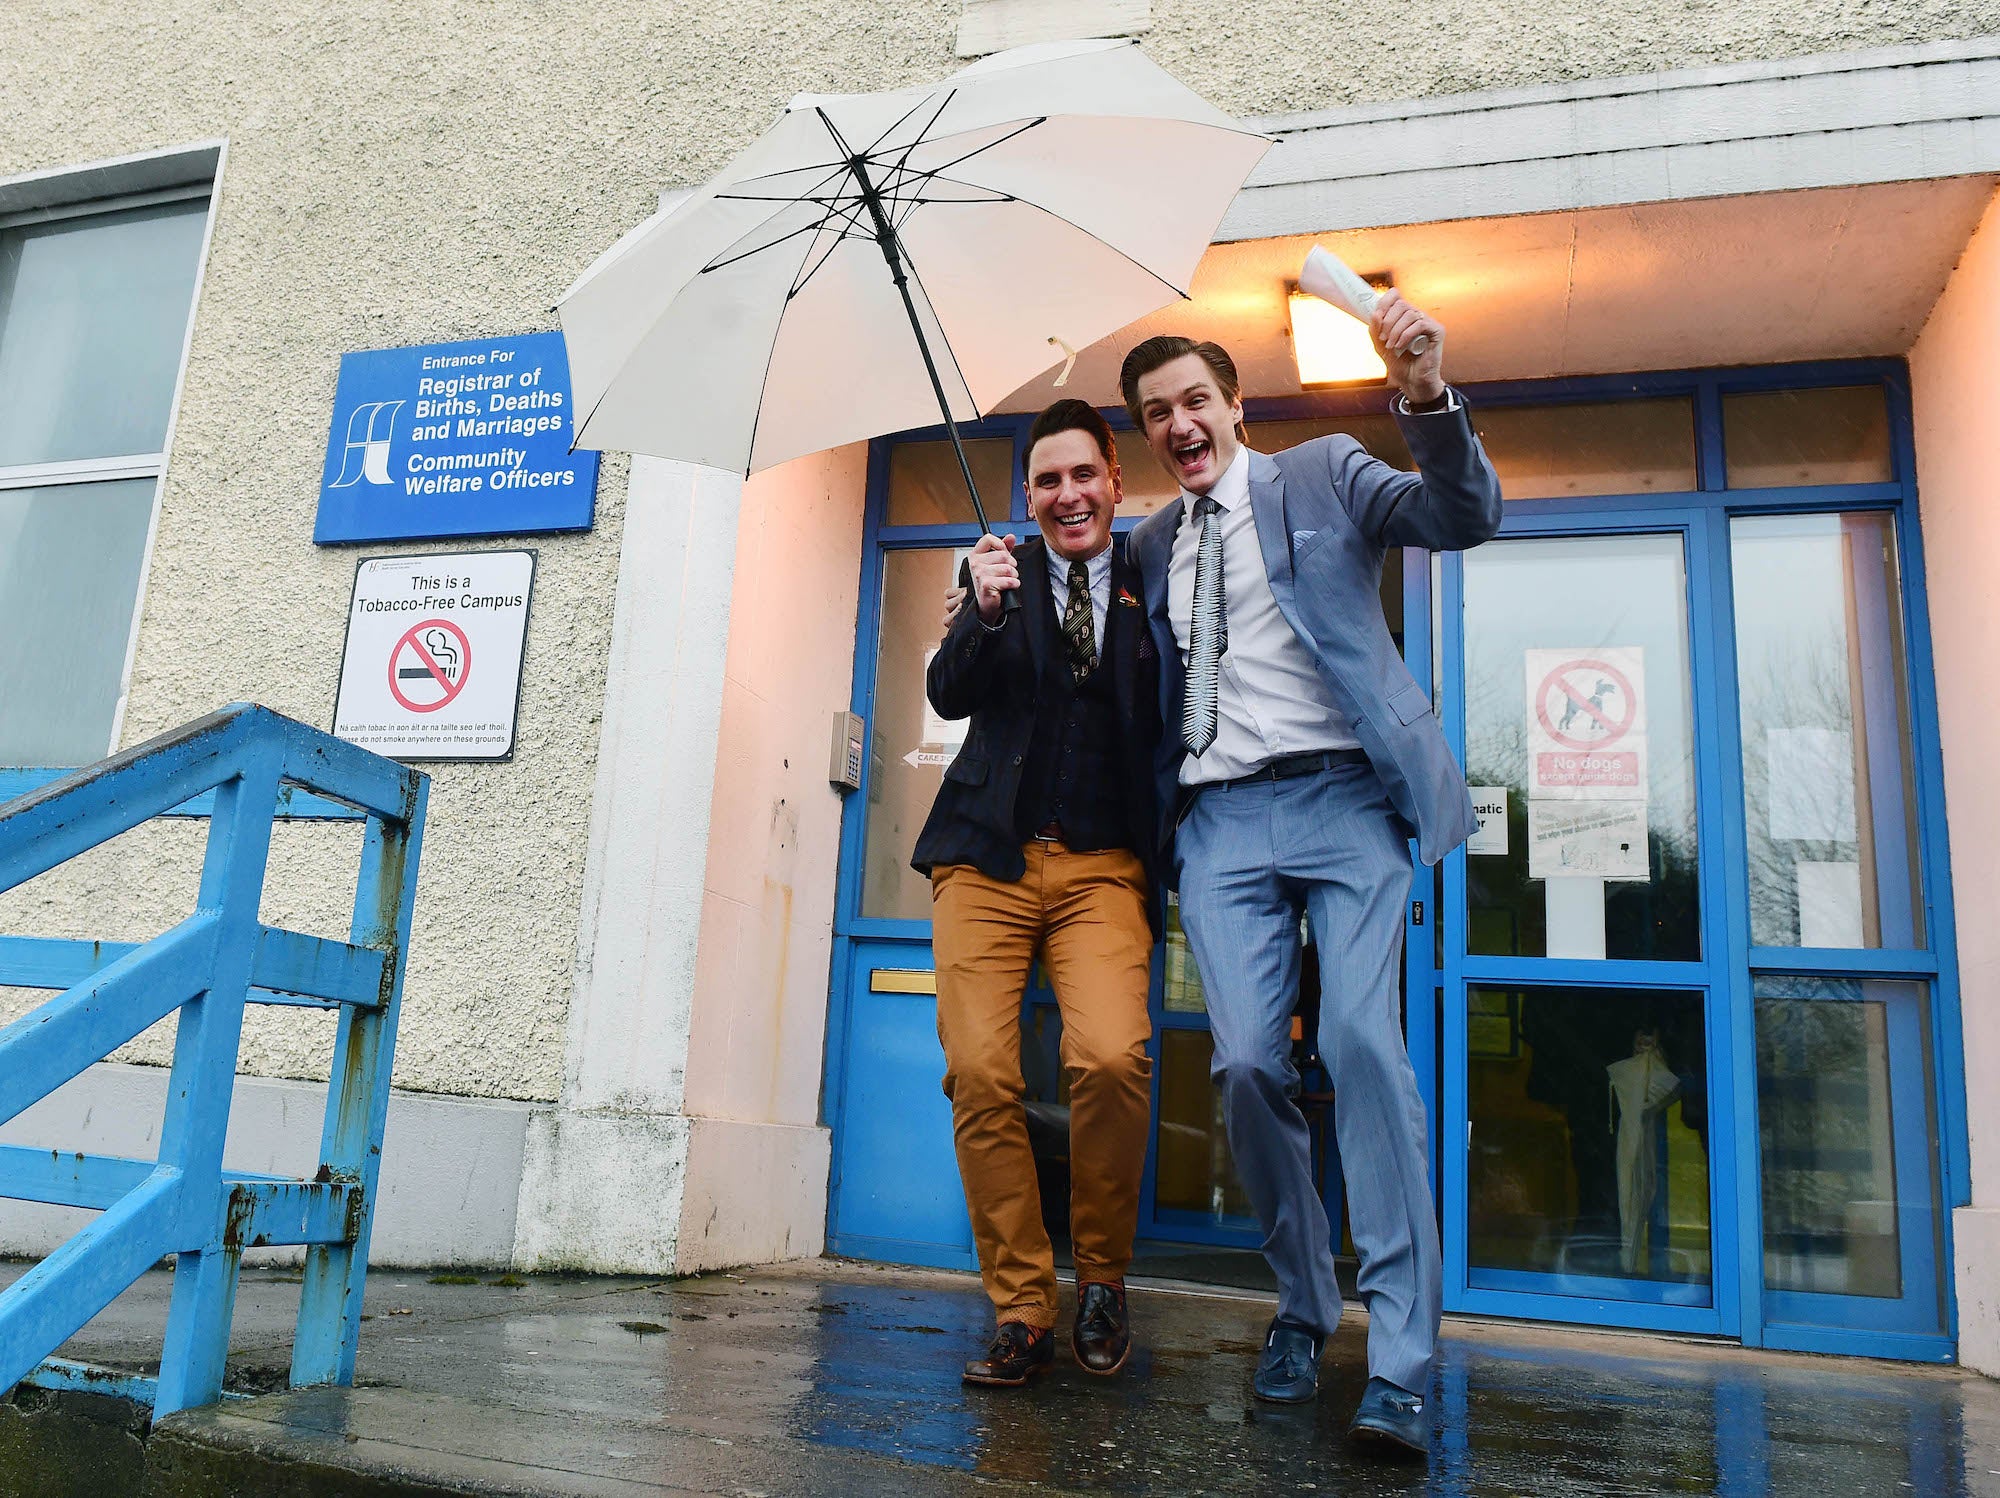 Richard Dowling, left, and Cormac Gollogly, right, on in Clonmel, Ireland.